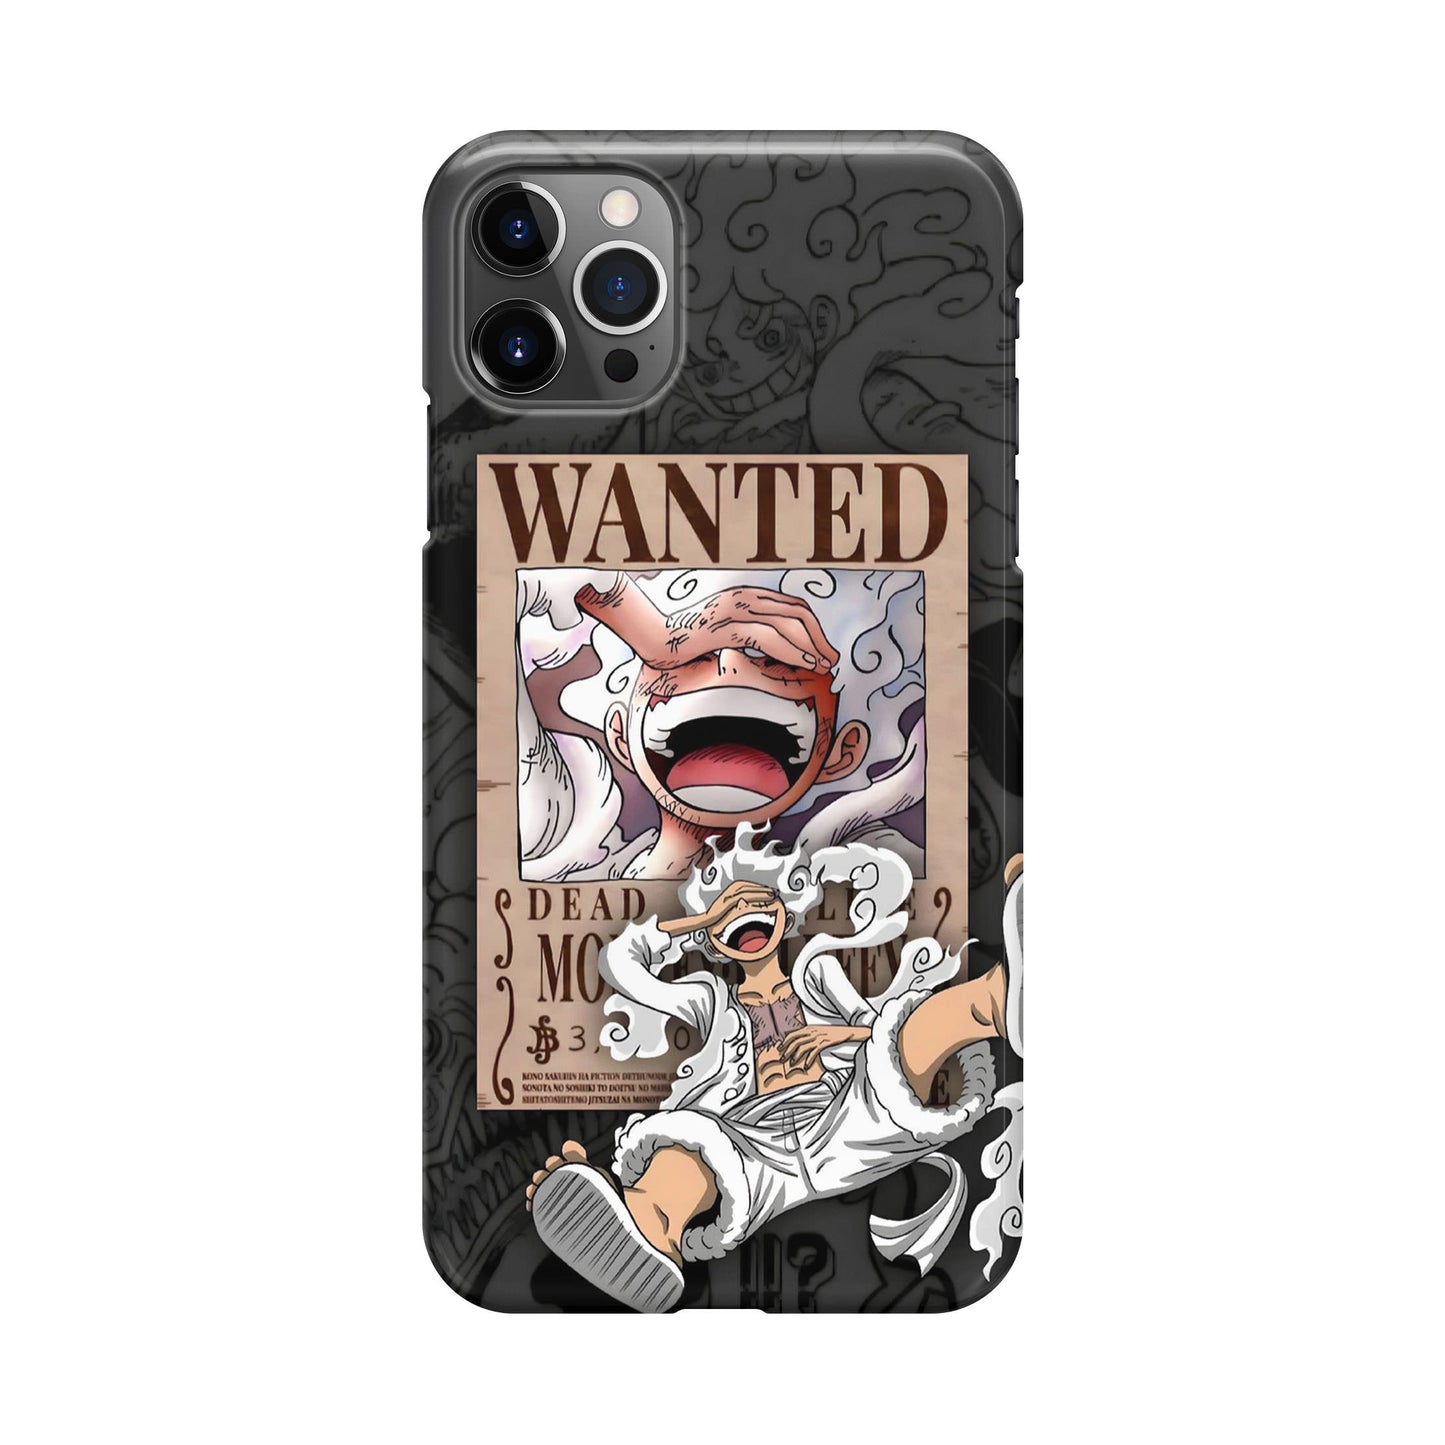 Gear 5 With Poster iPhone 12 Pro Case